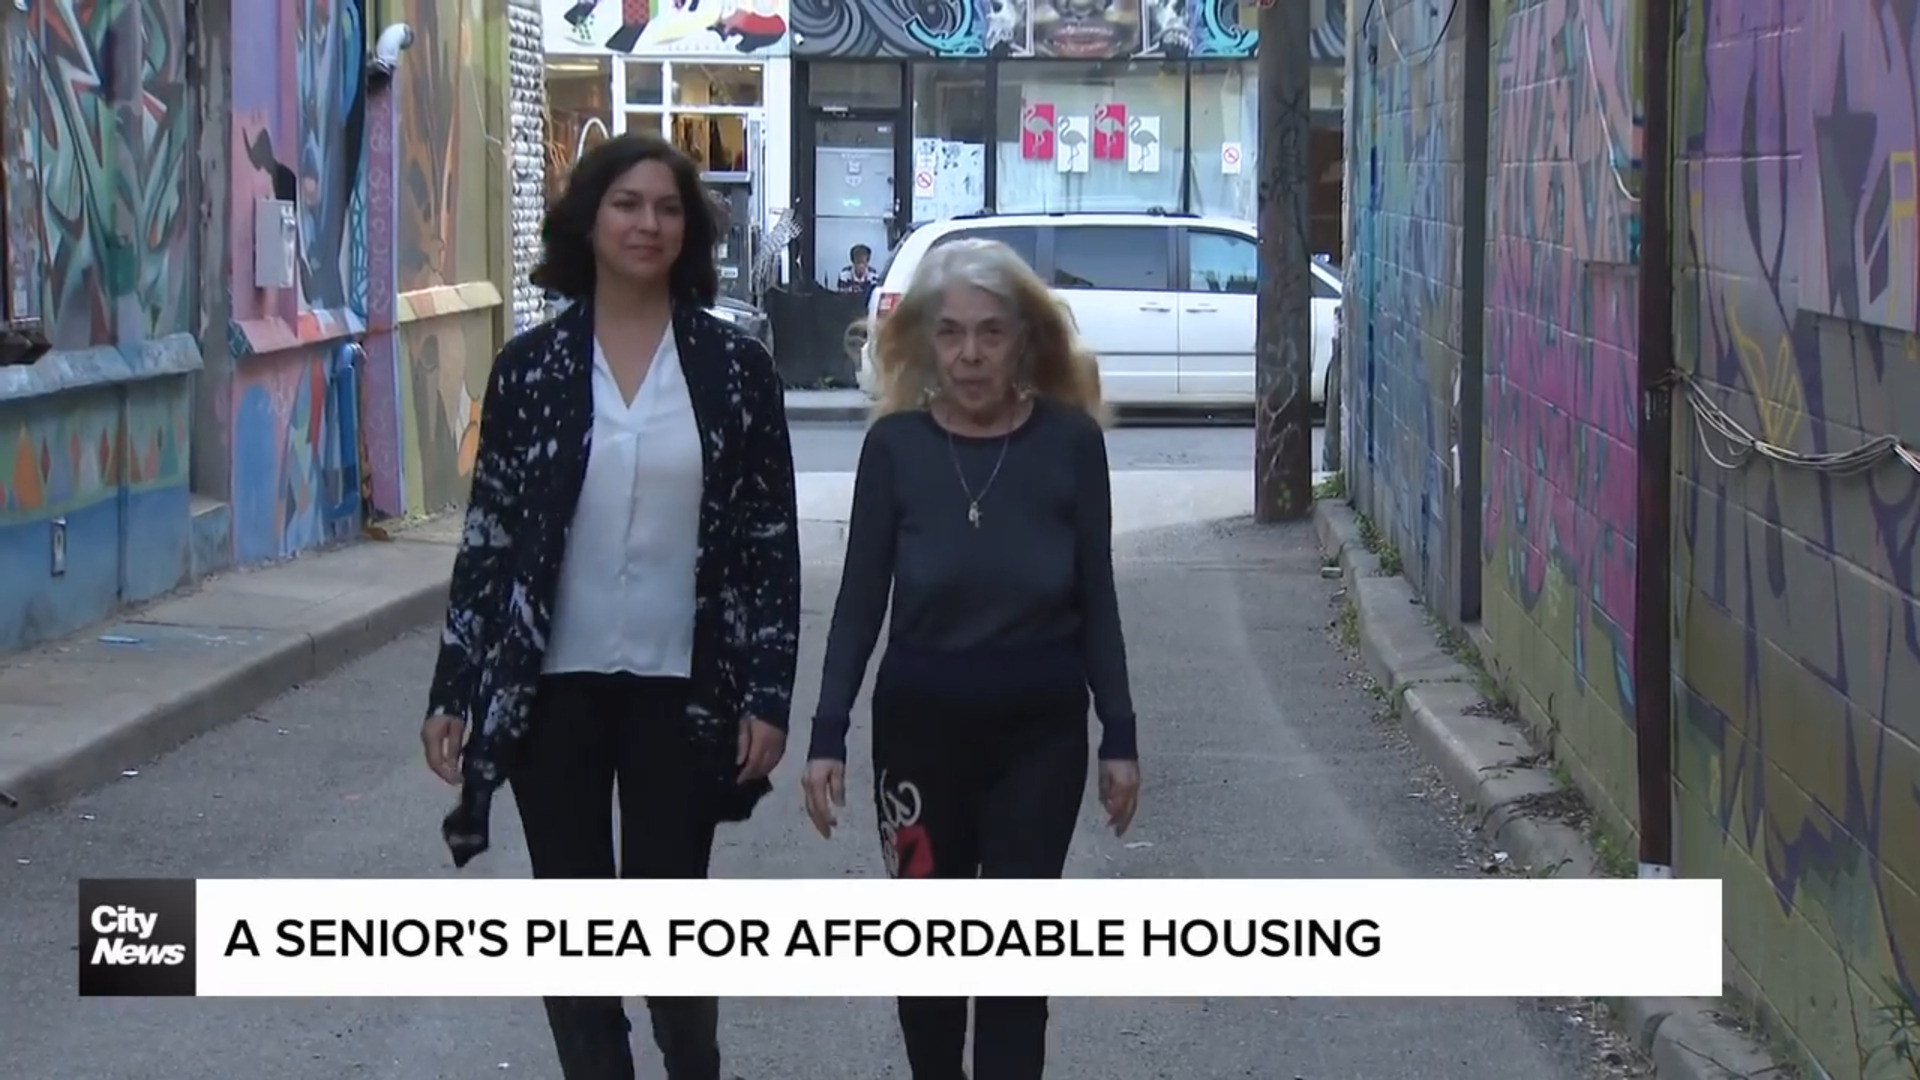 A senior's plea for affordable housing